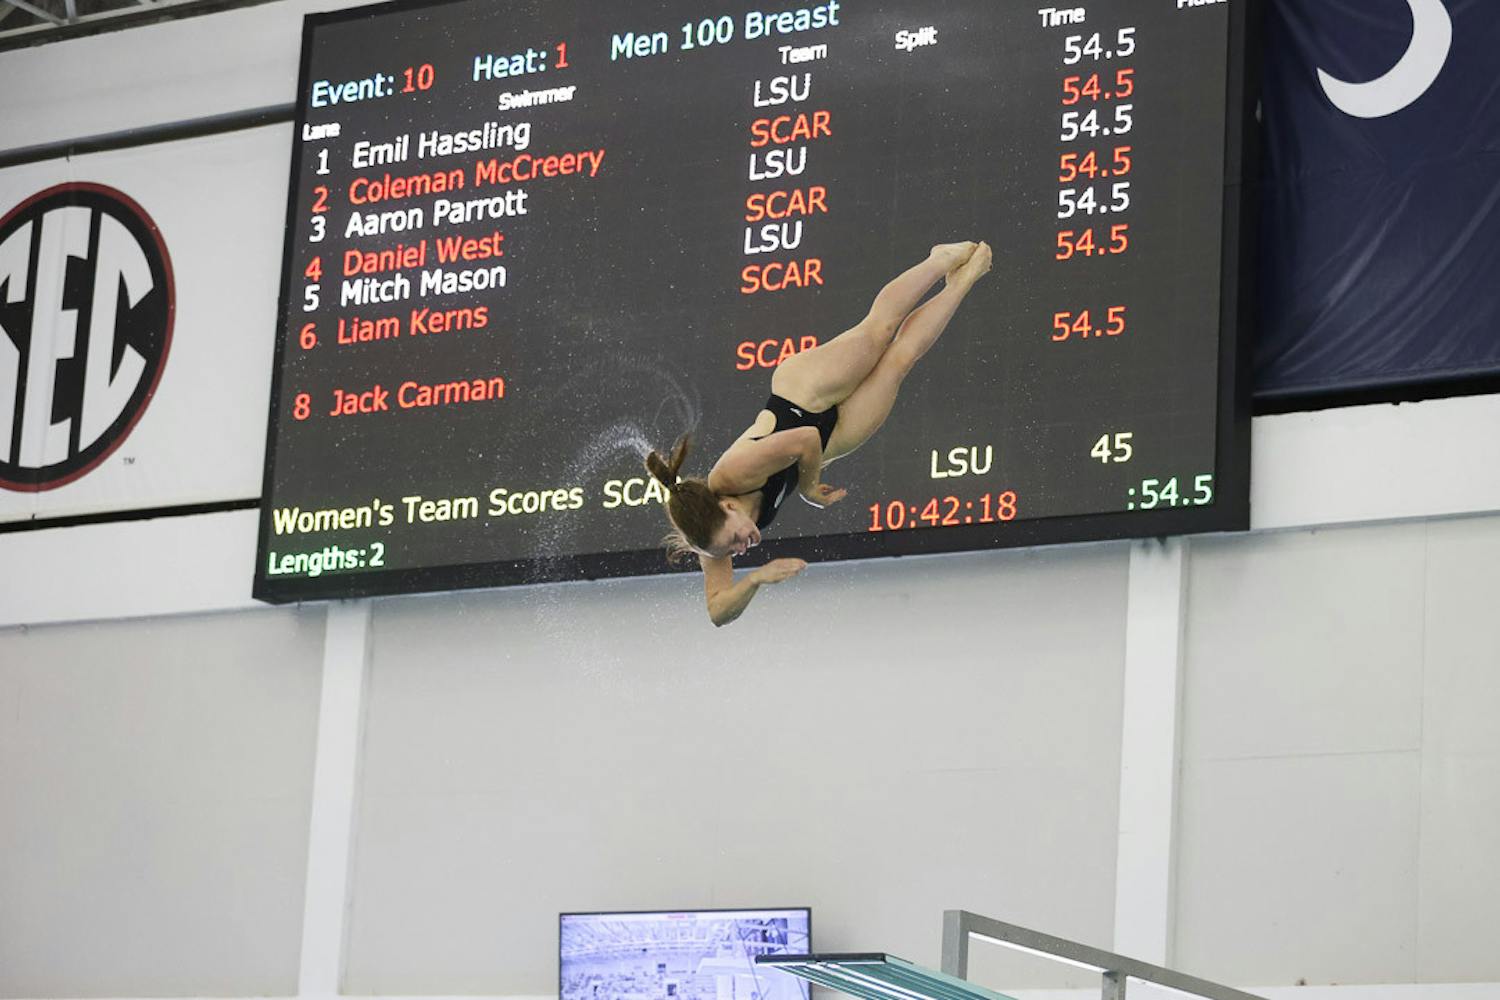 Graduate diver Brooke Schultz does a twisting dive off of the board duirng the meet against LSU at Carolina Natatorium on Oct. 8, 2022. Shultz made placed first in one-meter and three-meter finals at the SEC Swimming and Diving Championship in College Station, Texas, from Feb. 14-18, 2023.&nbsp;